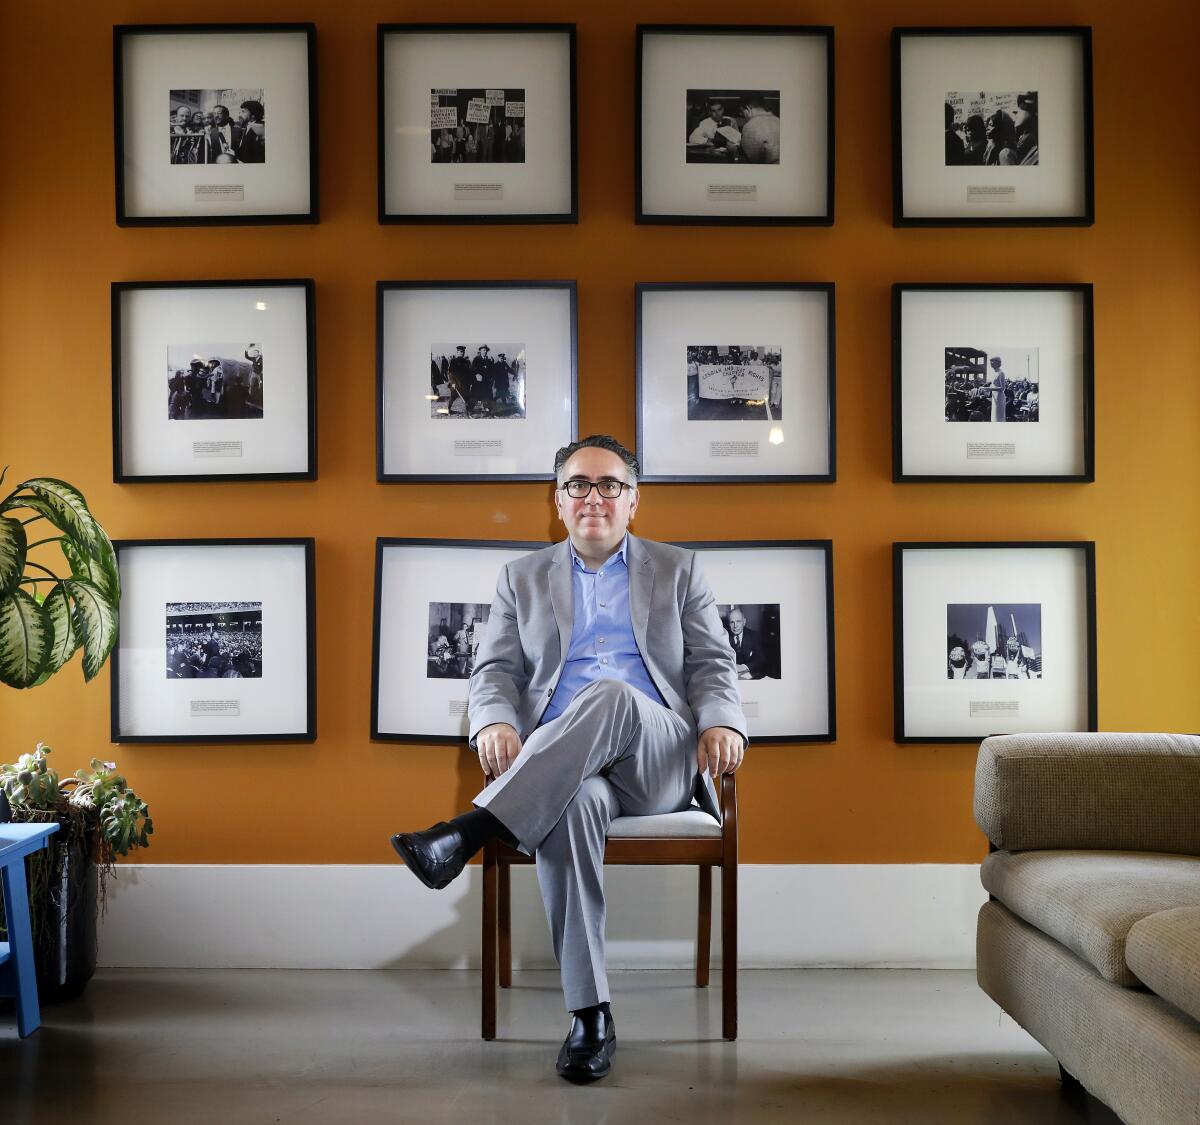 A person sits in a chair in front of a wall of framed photos.